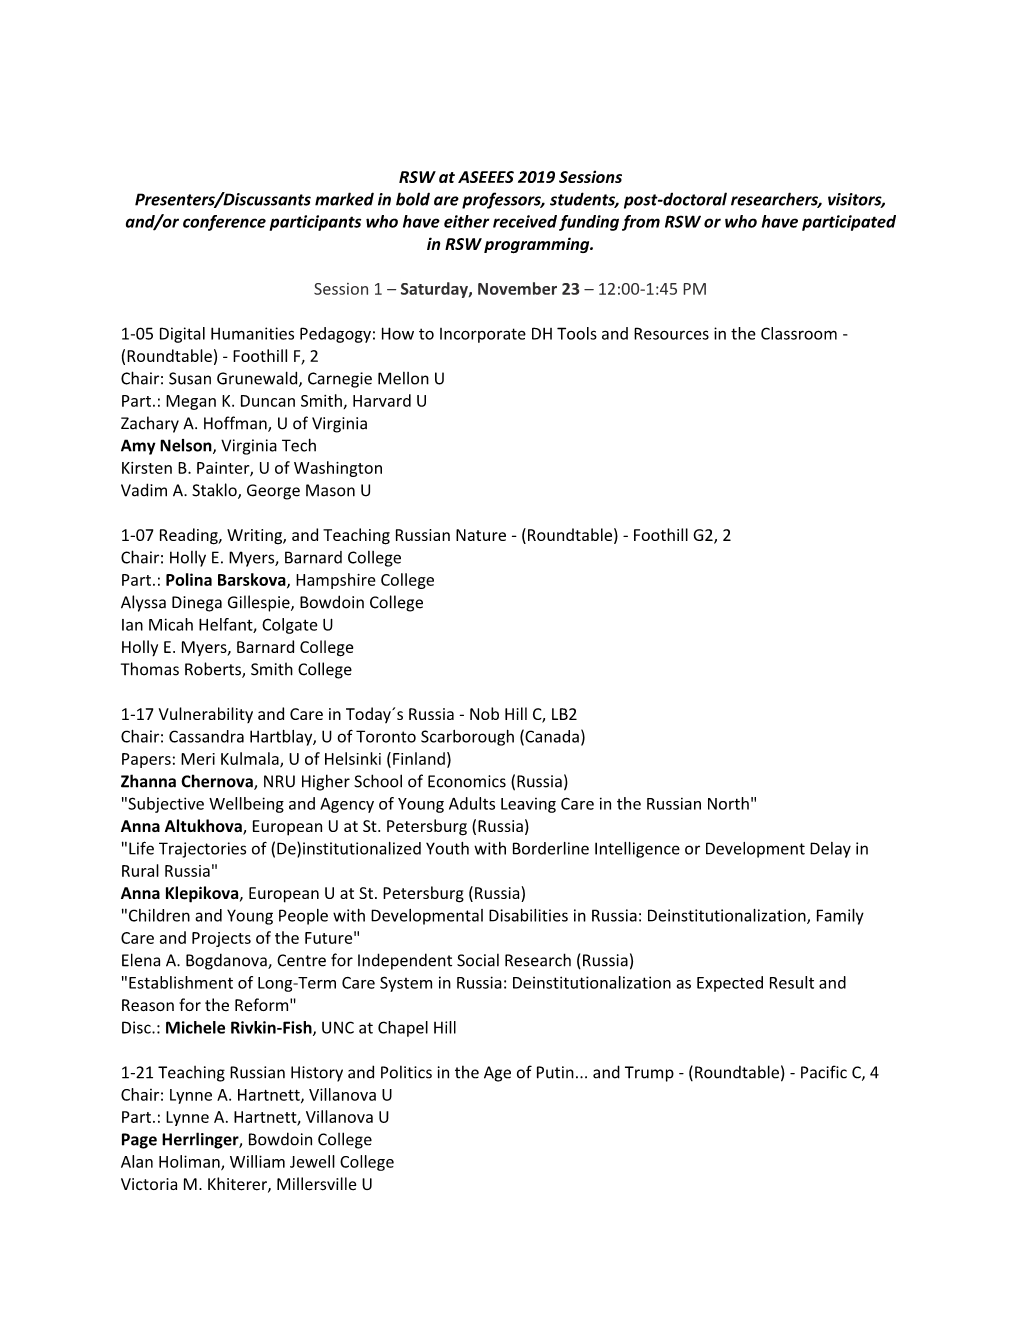 RSW at ASEEES 2019 Sessions Presenters/Discussants Marked In